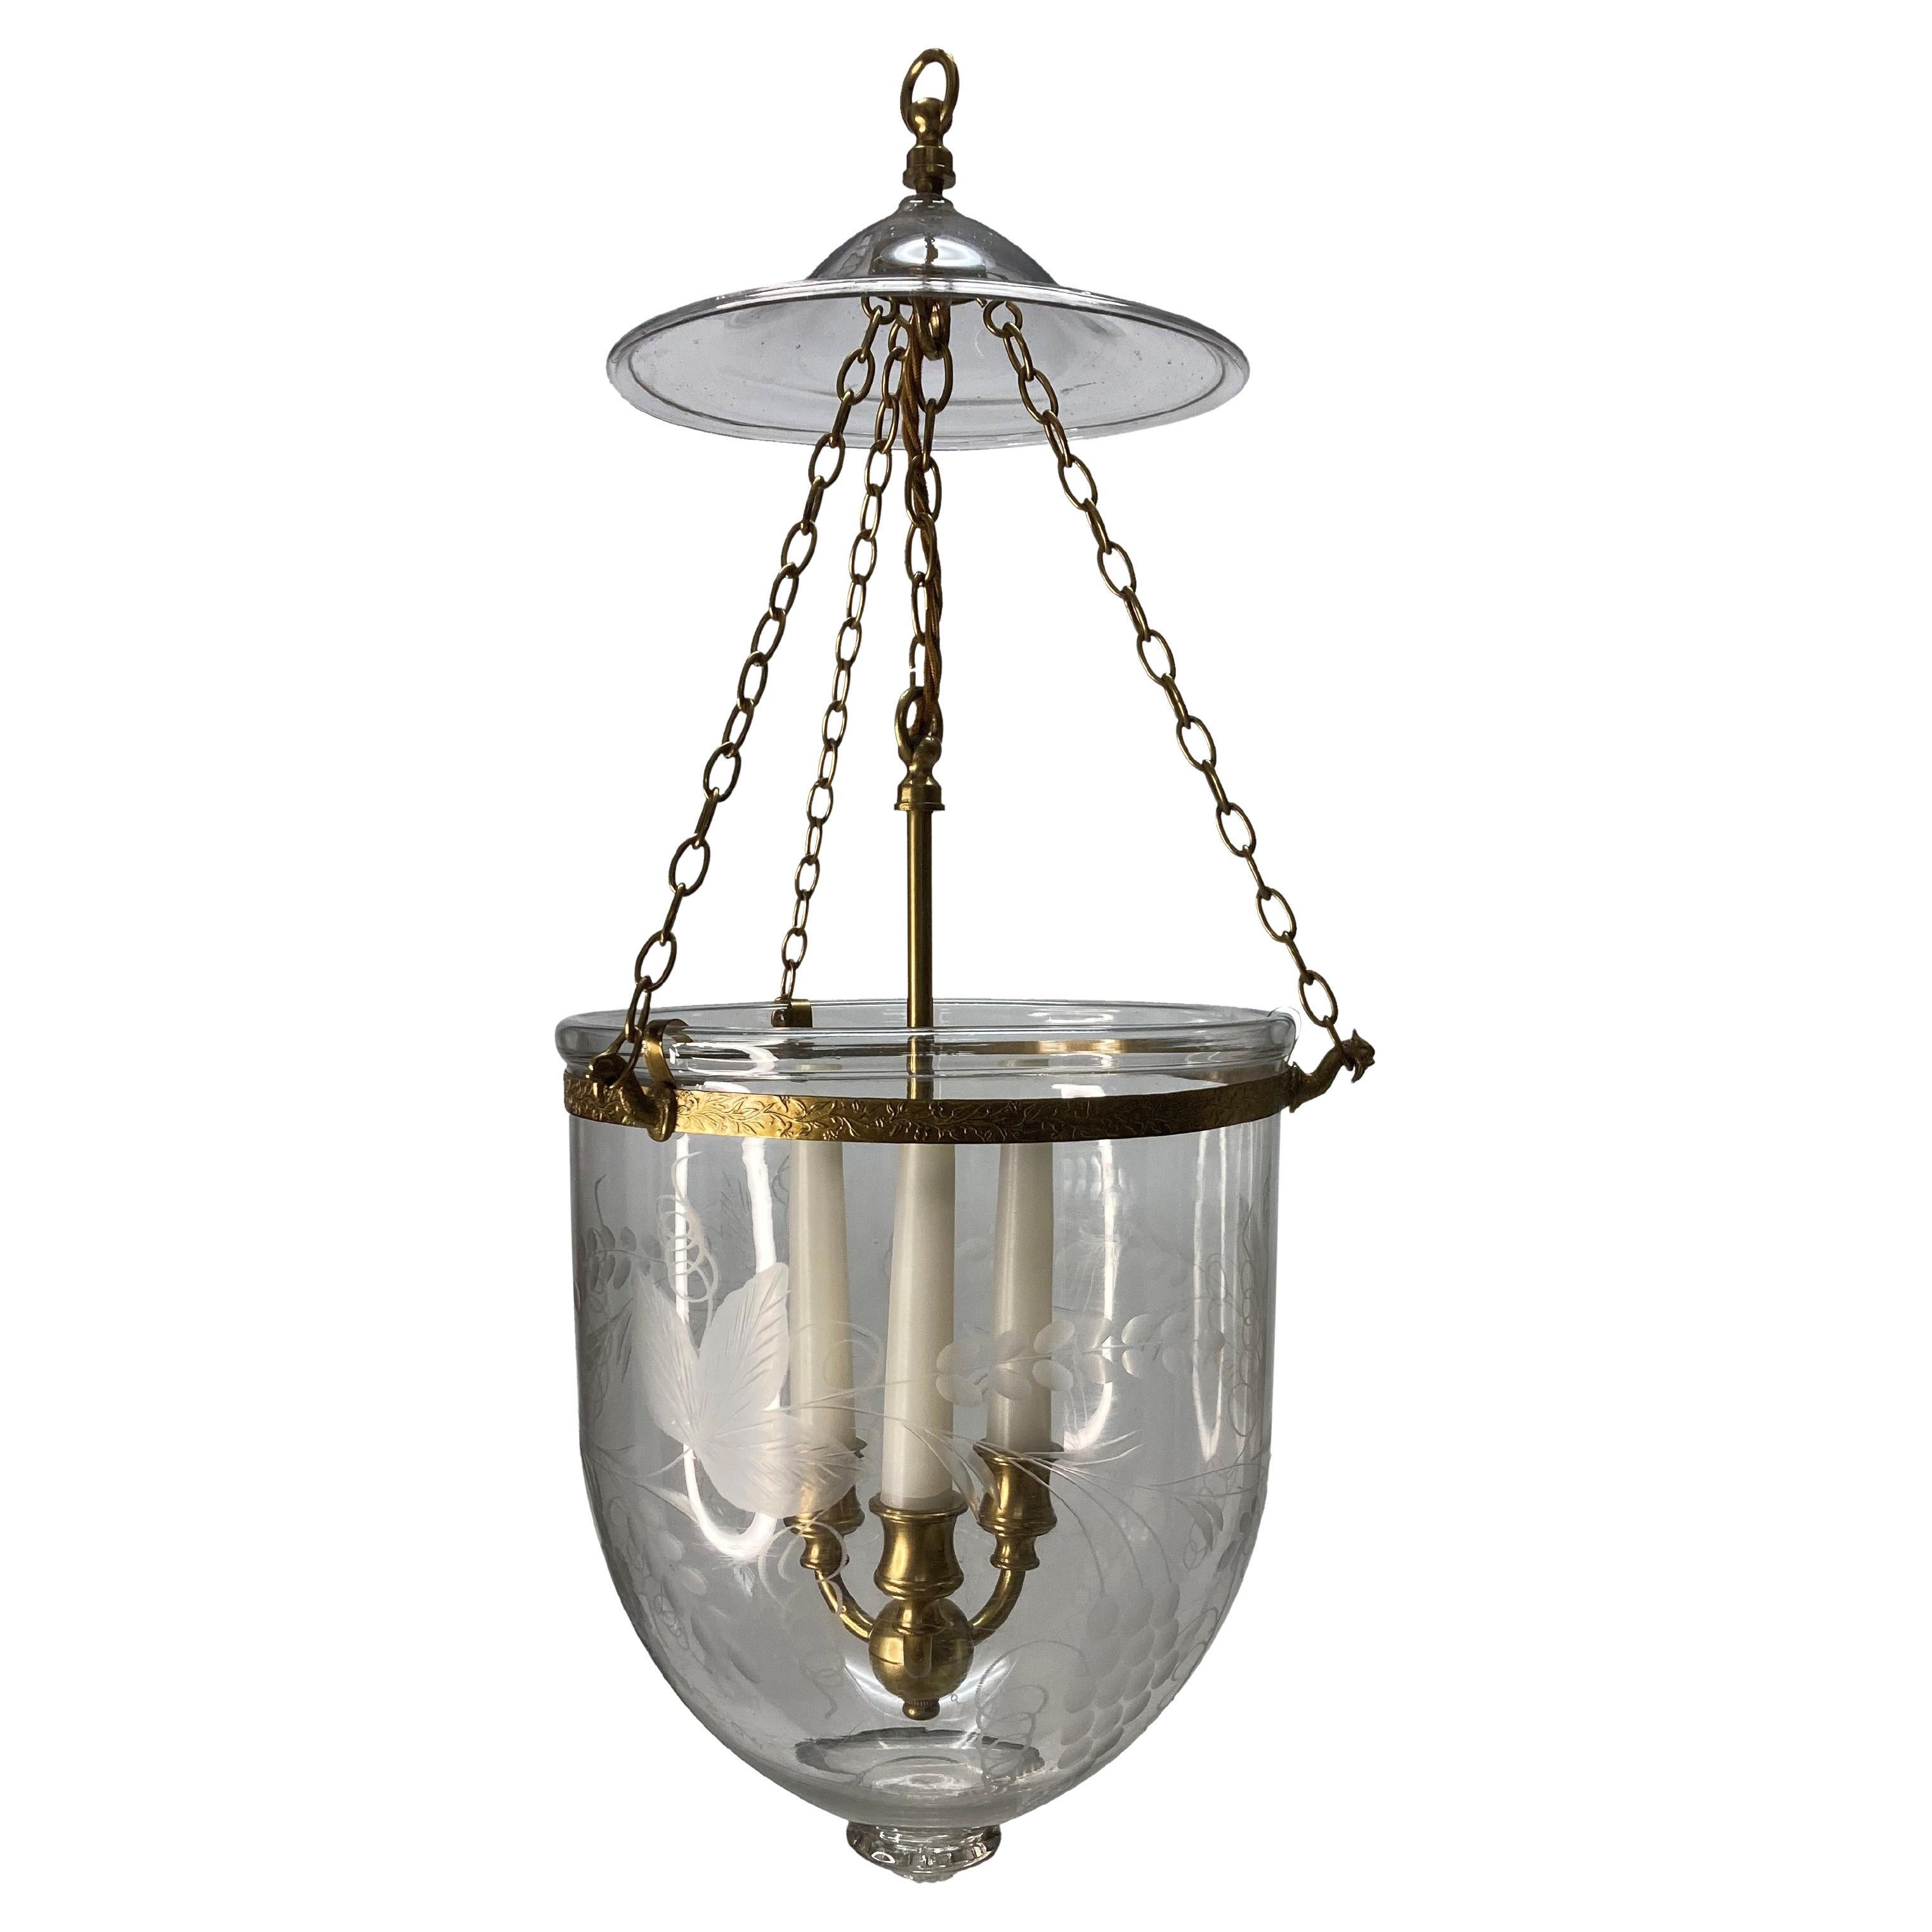 English Bell Lantern With Brass Fittings & Grape Vine Design For Sale